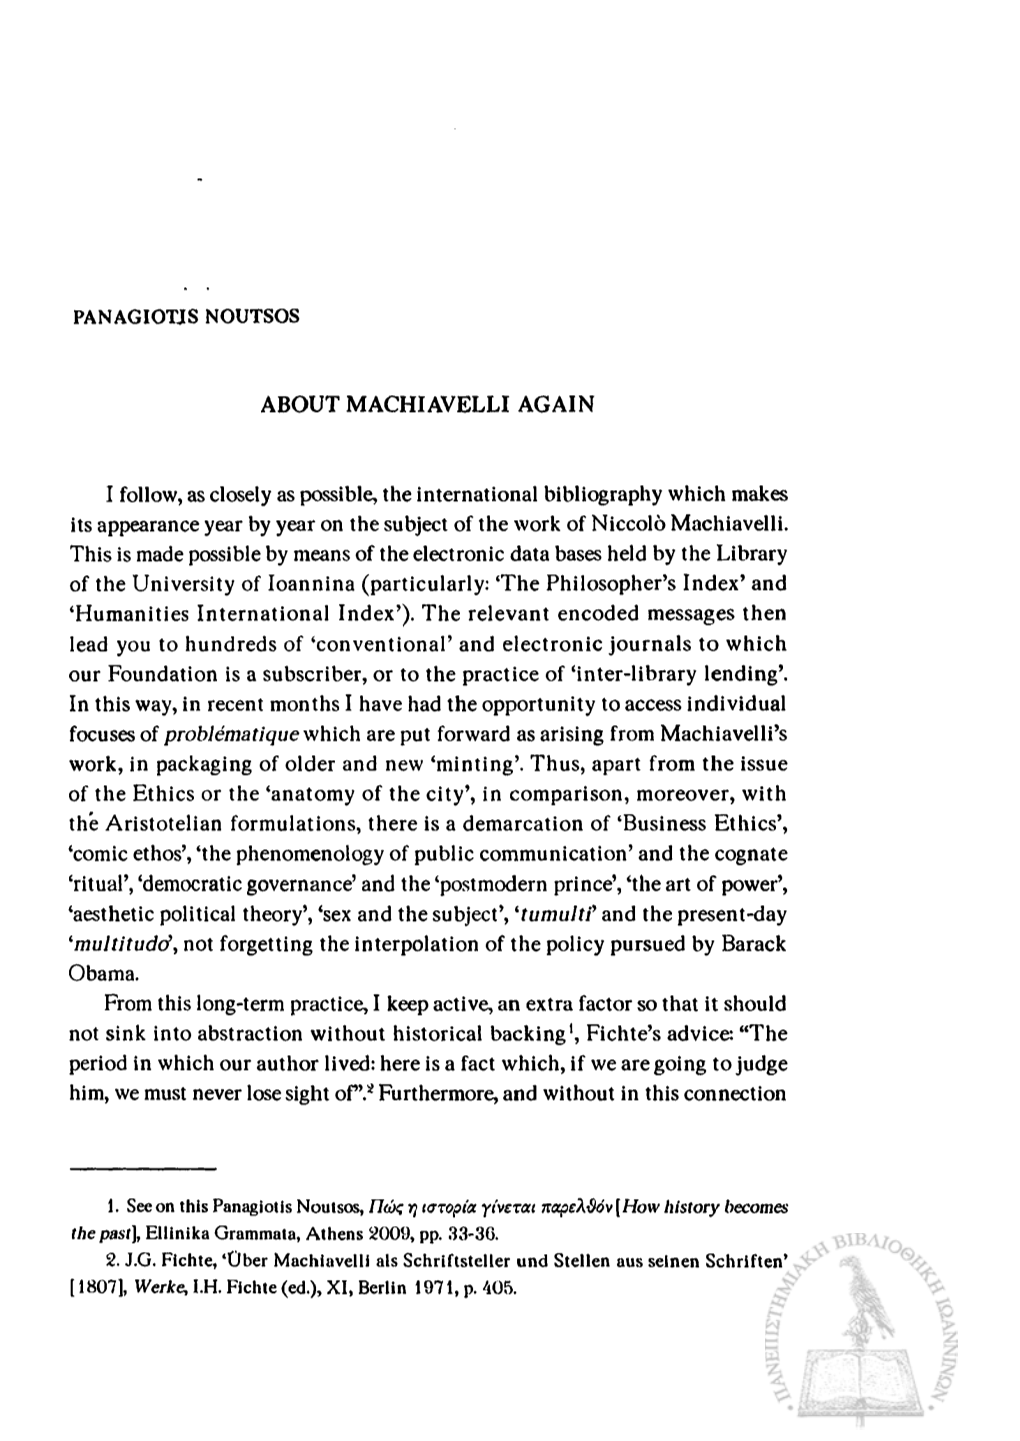 ABOUT MACHIAVELLI AGAIN I Follow, As Closely As Possible, The